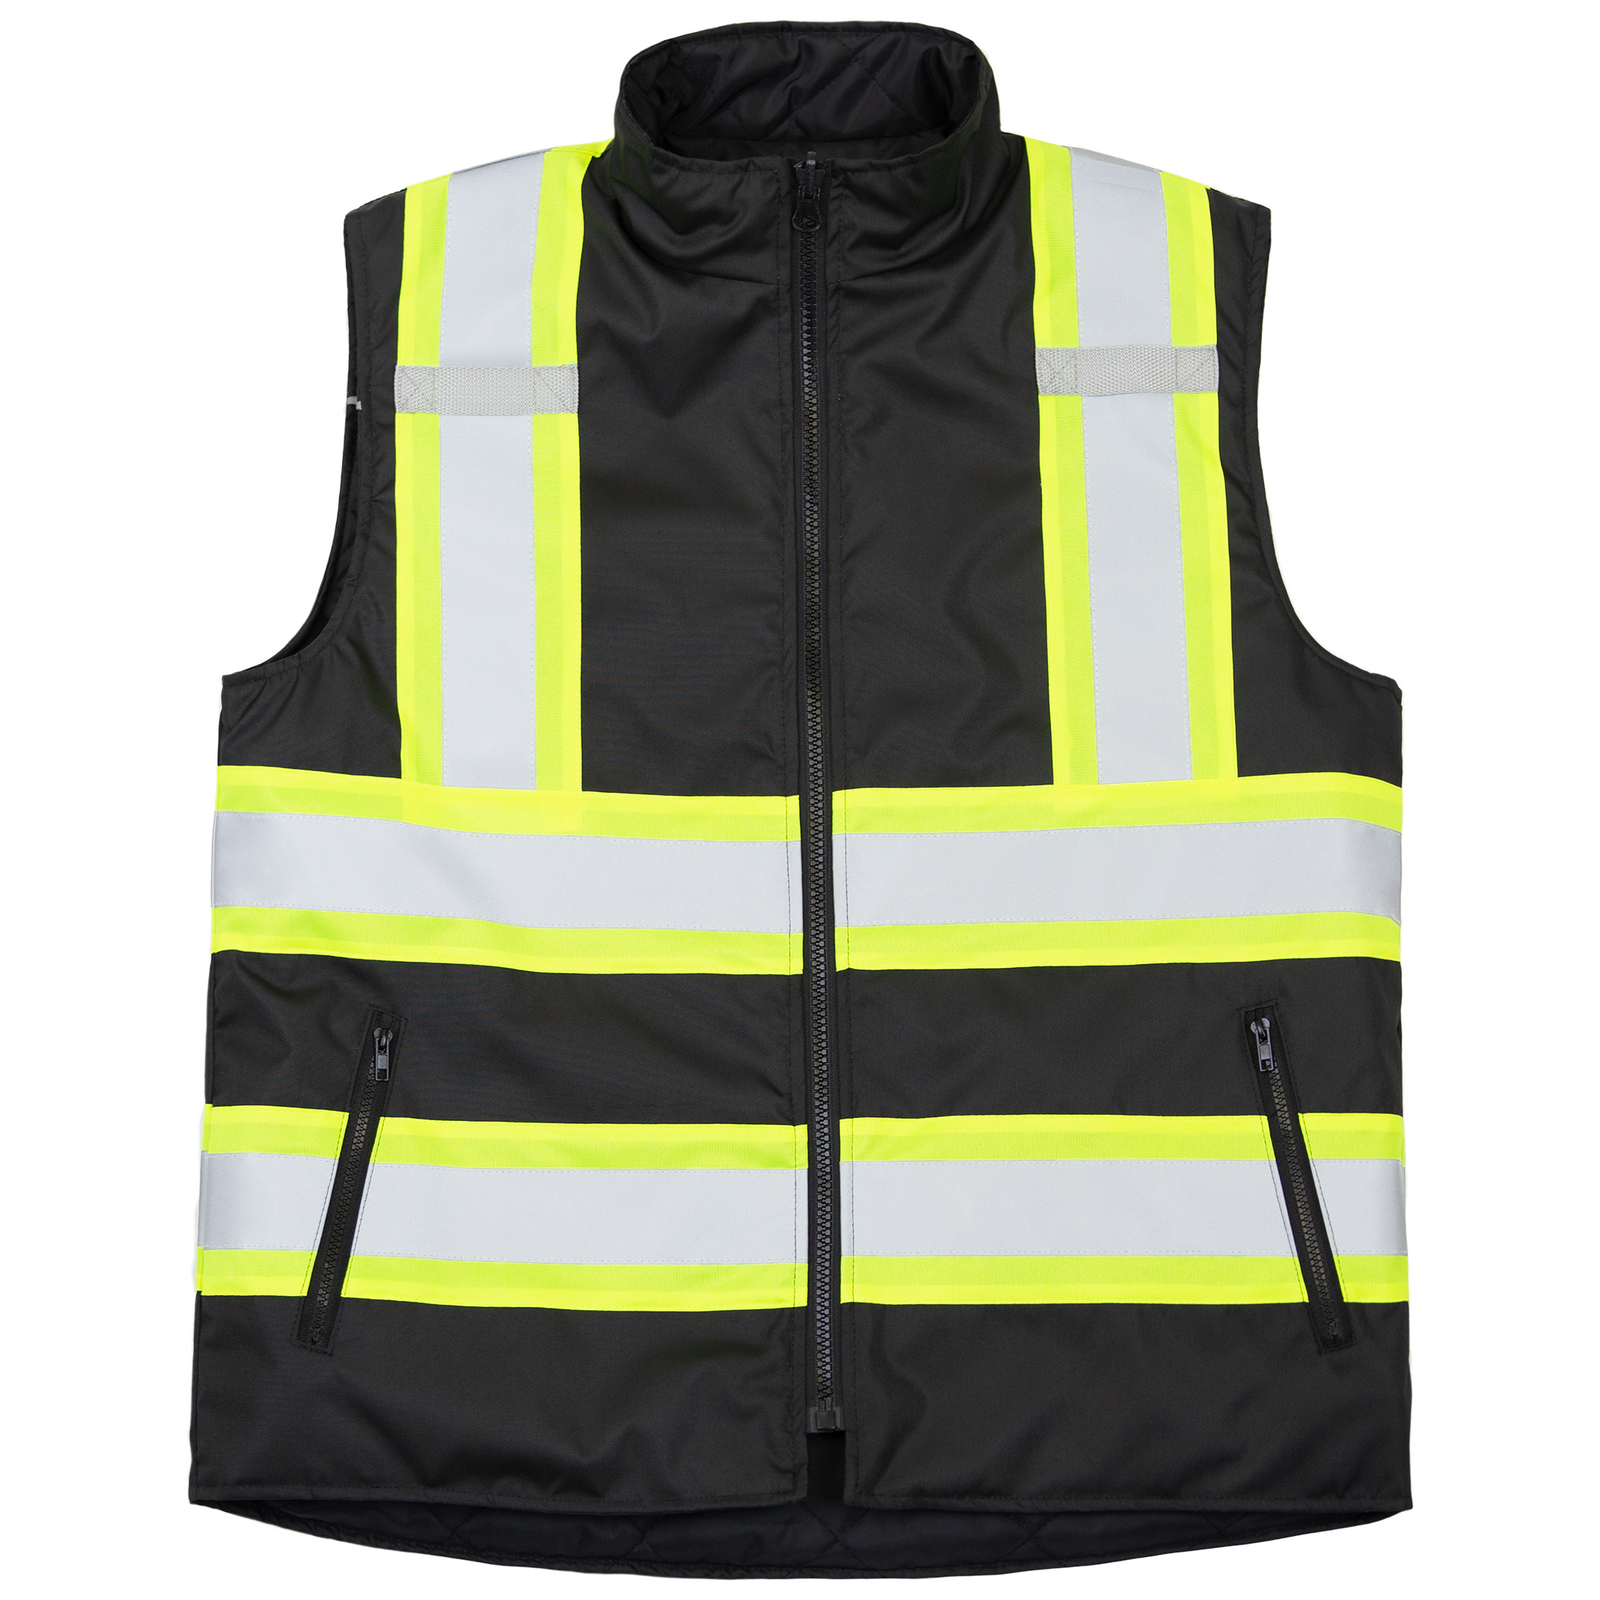 Front view of the black JORESTECH vi-vis X on back reversible insulated safety vest with reflective strips